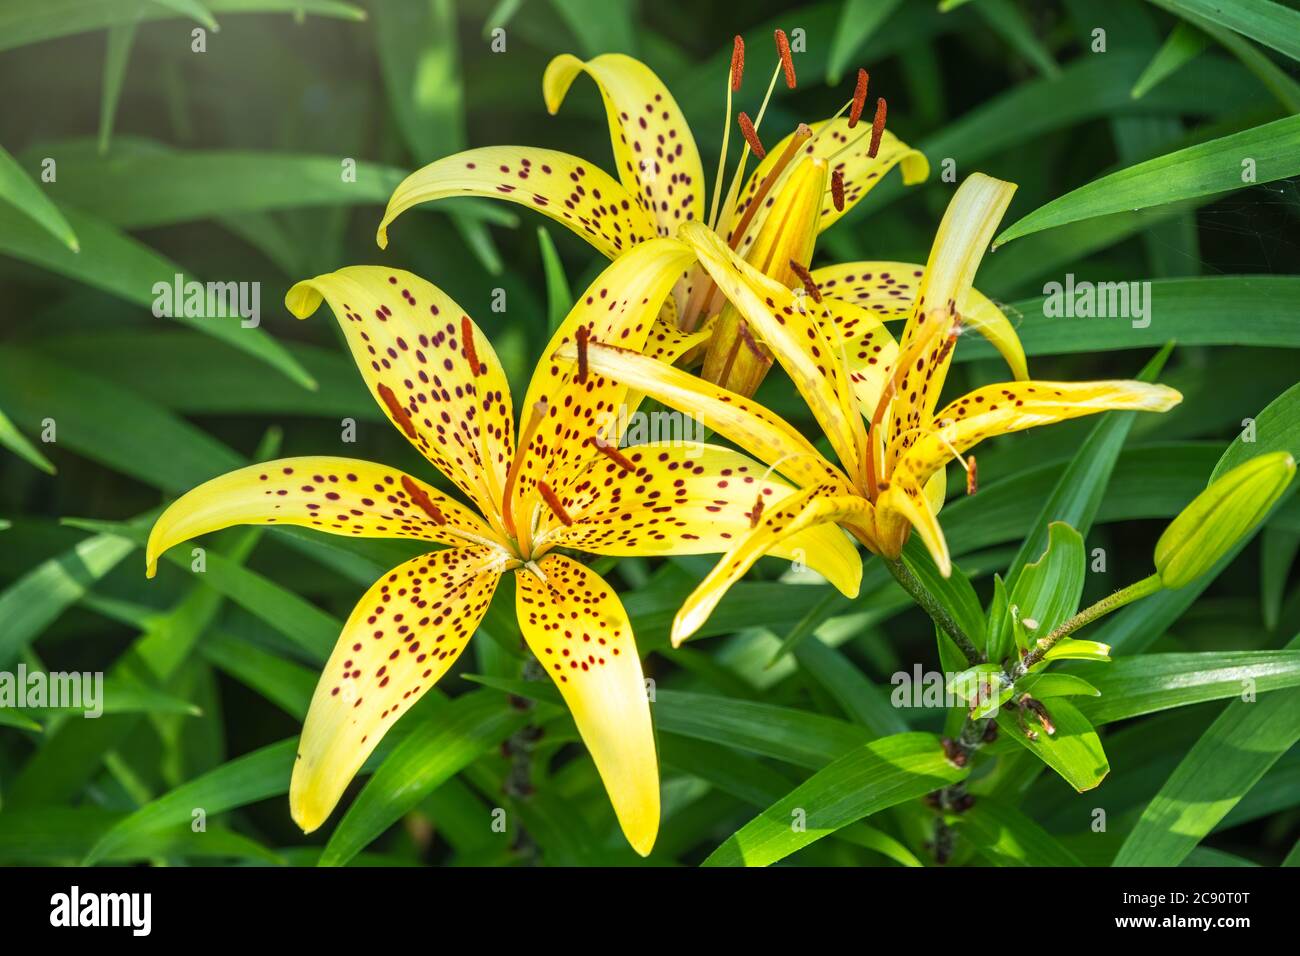 Summer yellow lily flower close-up. Lilium pardalinum, also known as leopard or panther lily, is a flowering bulbous perennial plant in lily family, n Stock Photo